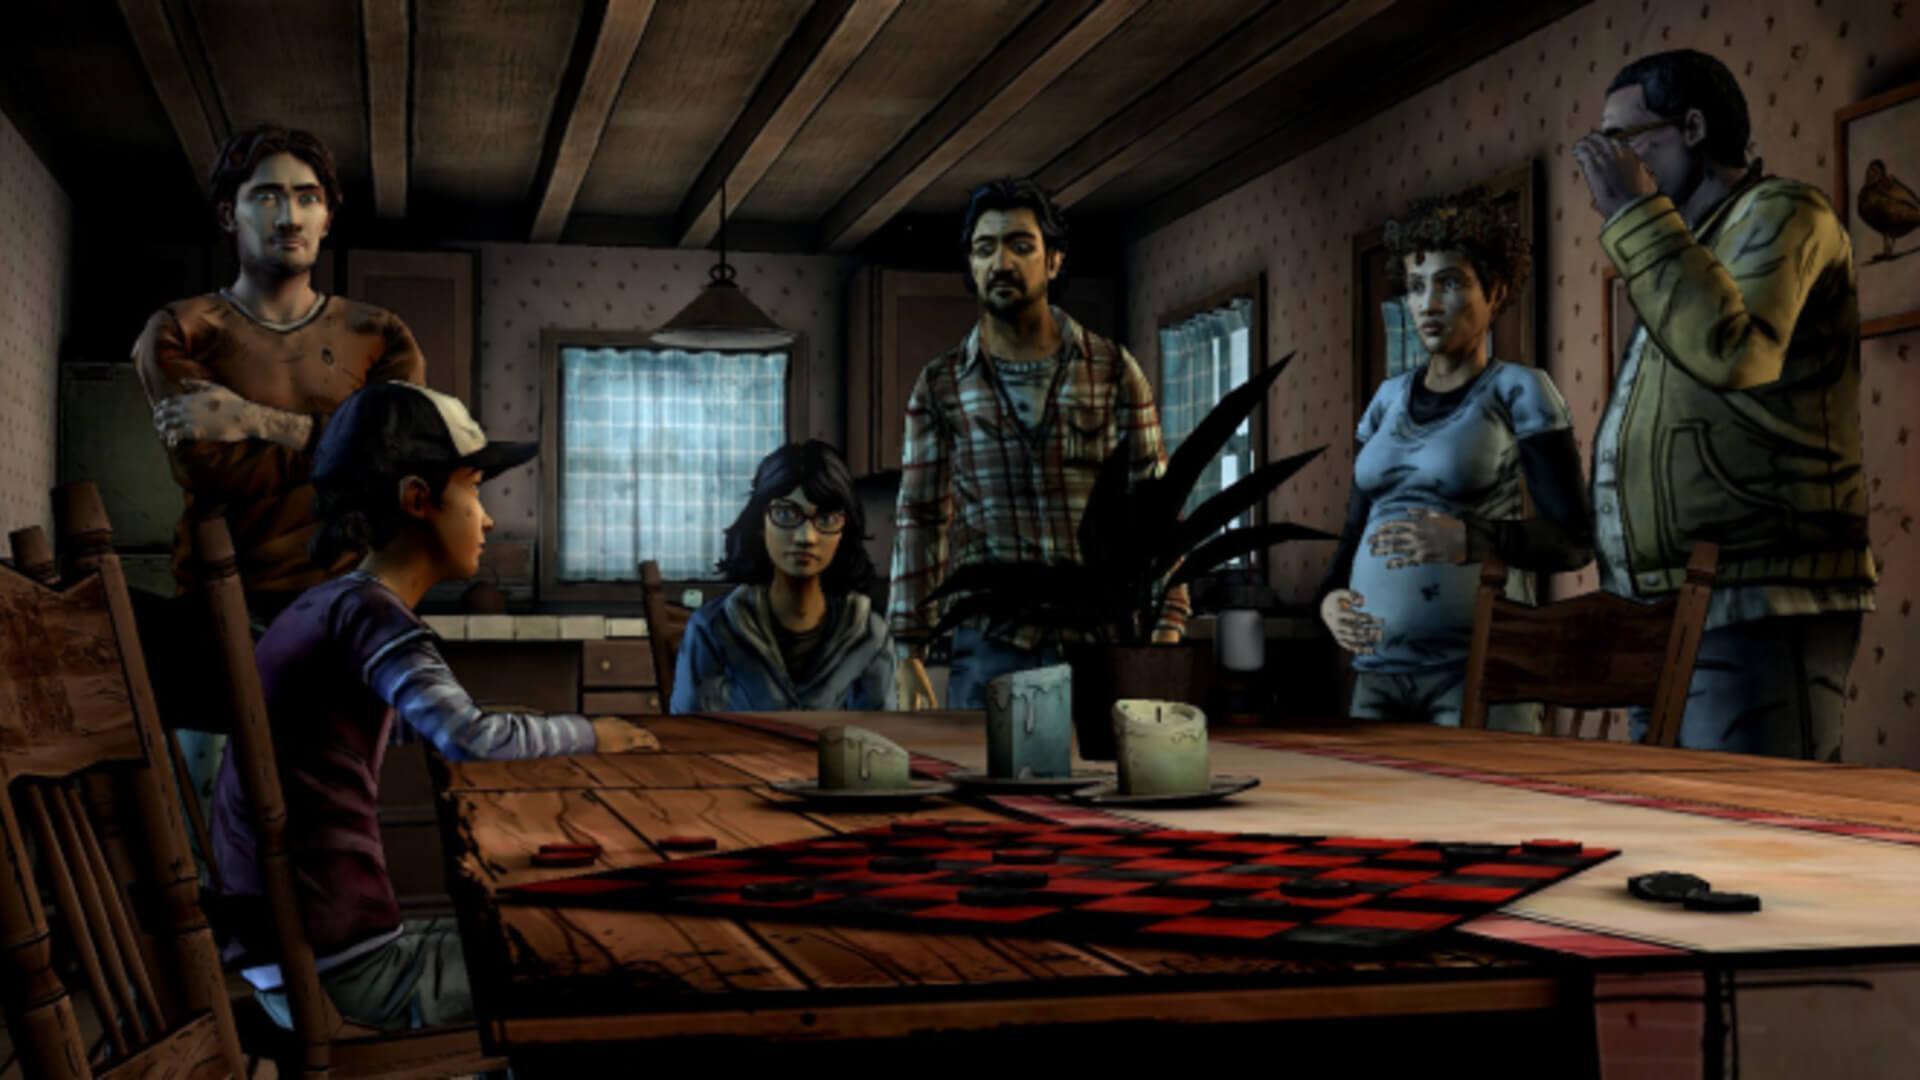 The Walking Dead Season 2 Walkthrough for Android - APK Download